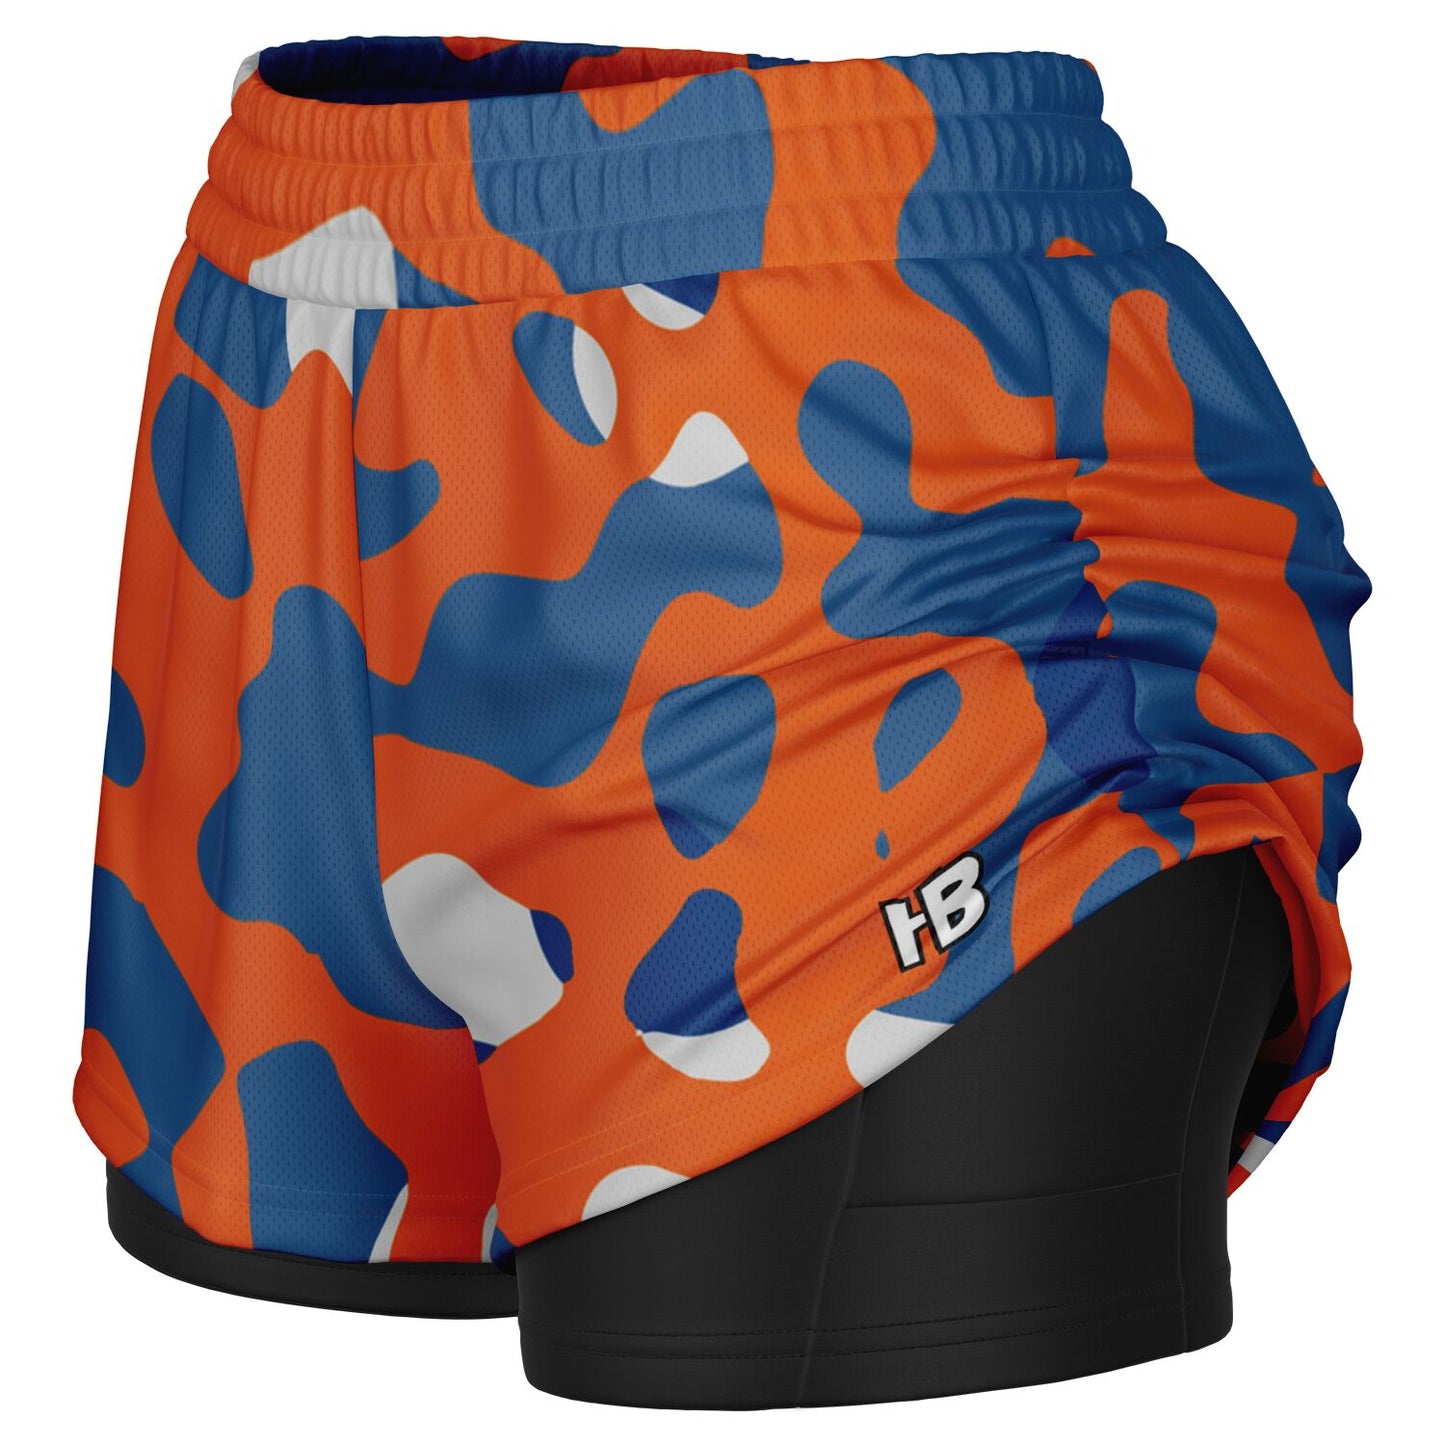 OrAnGe ChAoS cAmO mEnS aNd WoMeNs 2 In 1 ShOrTs